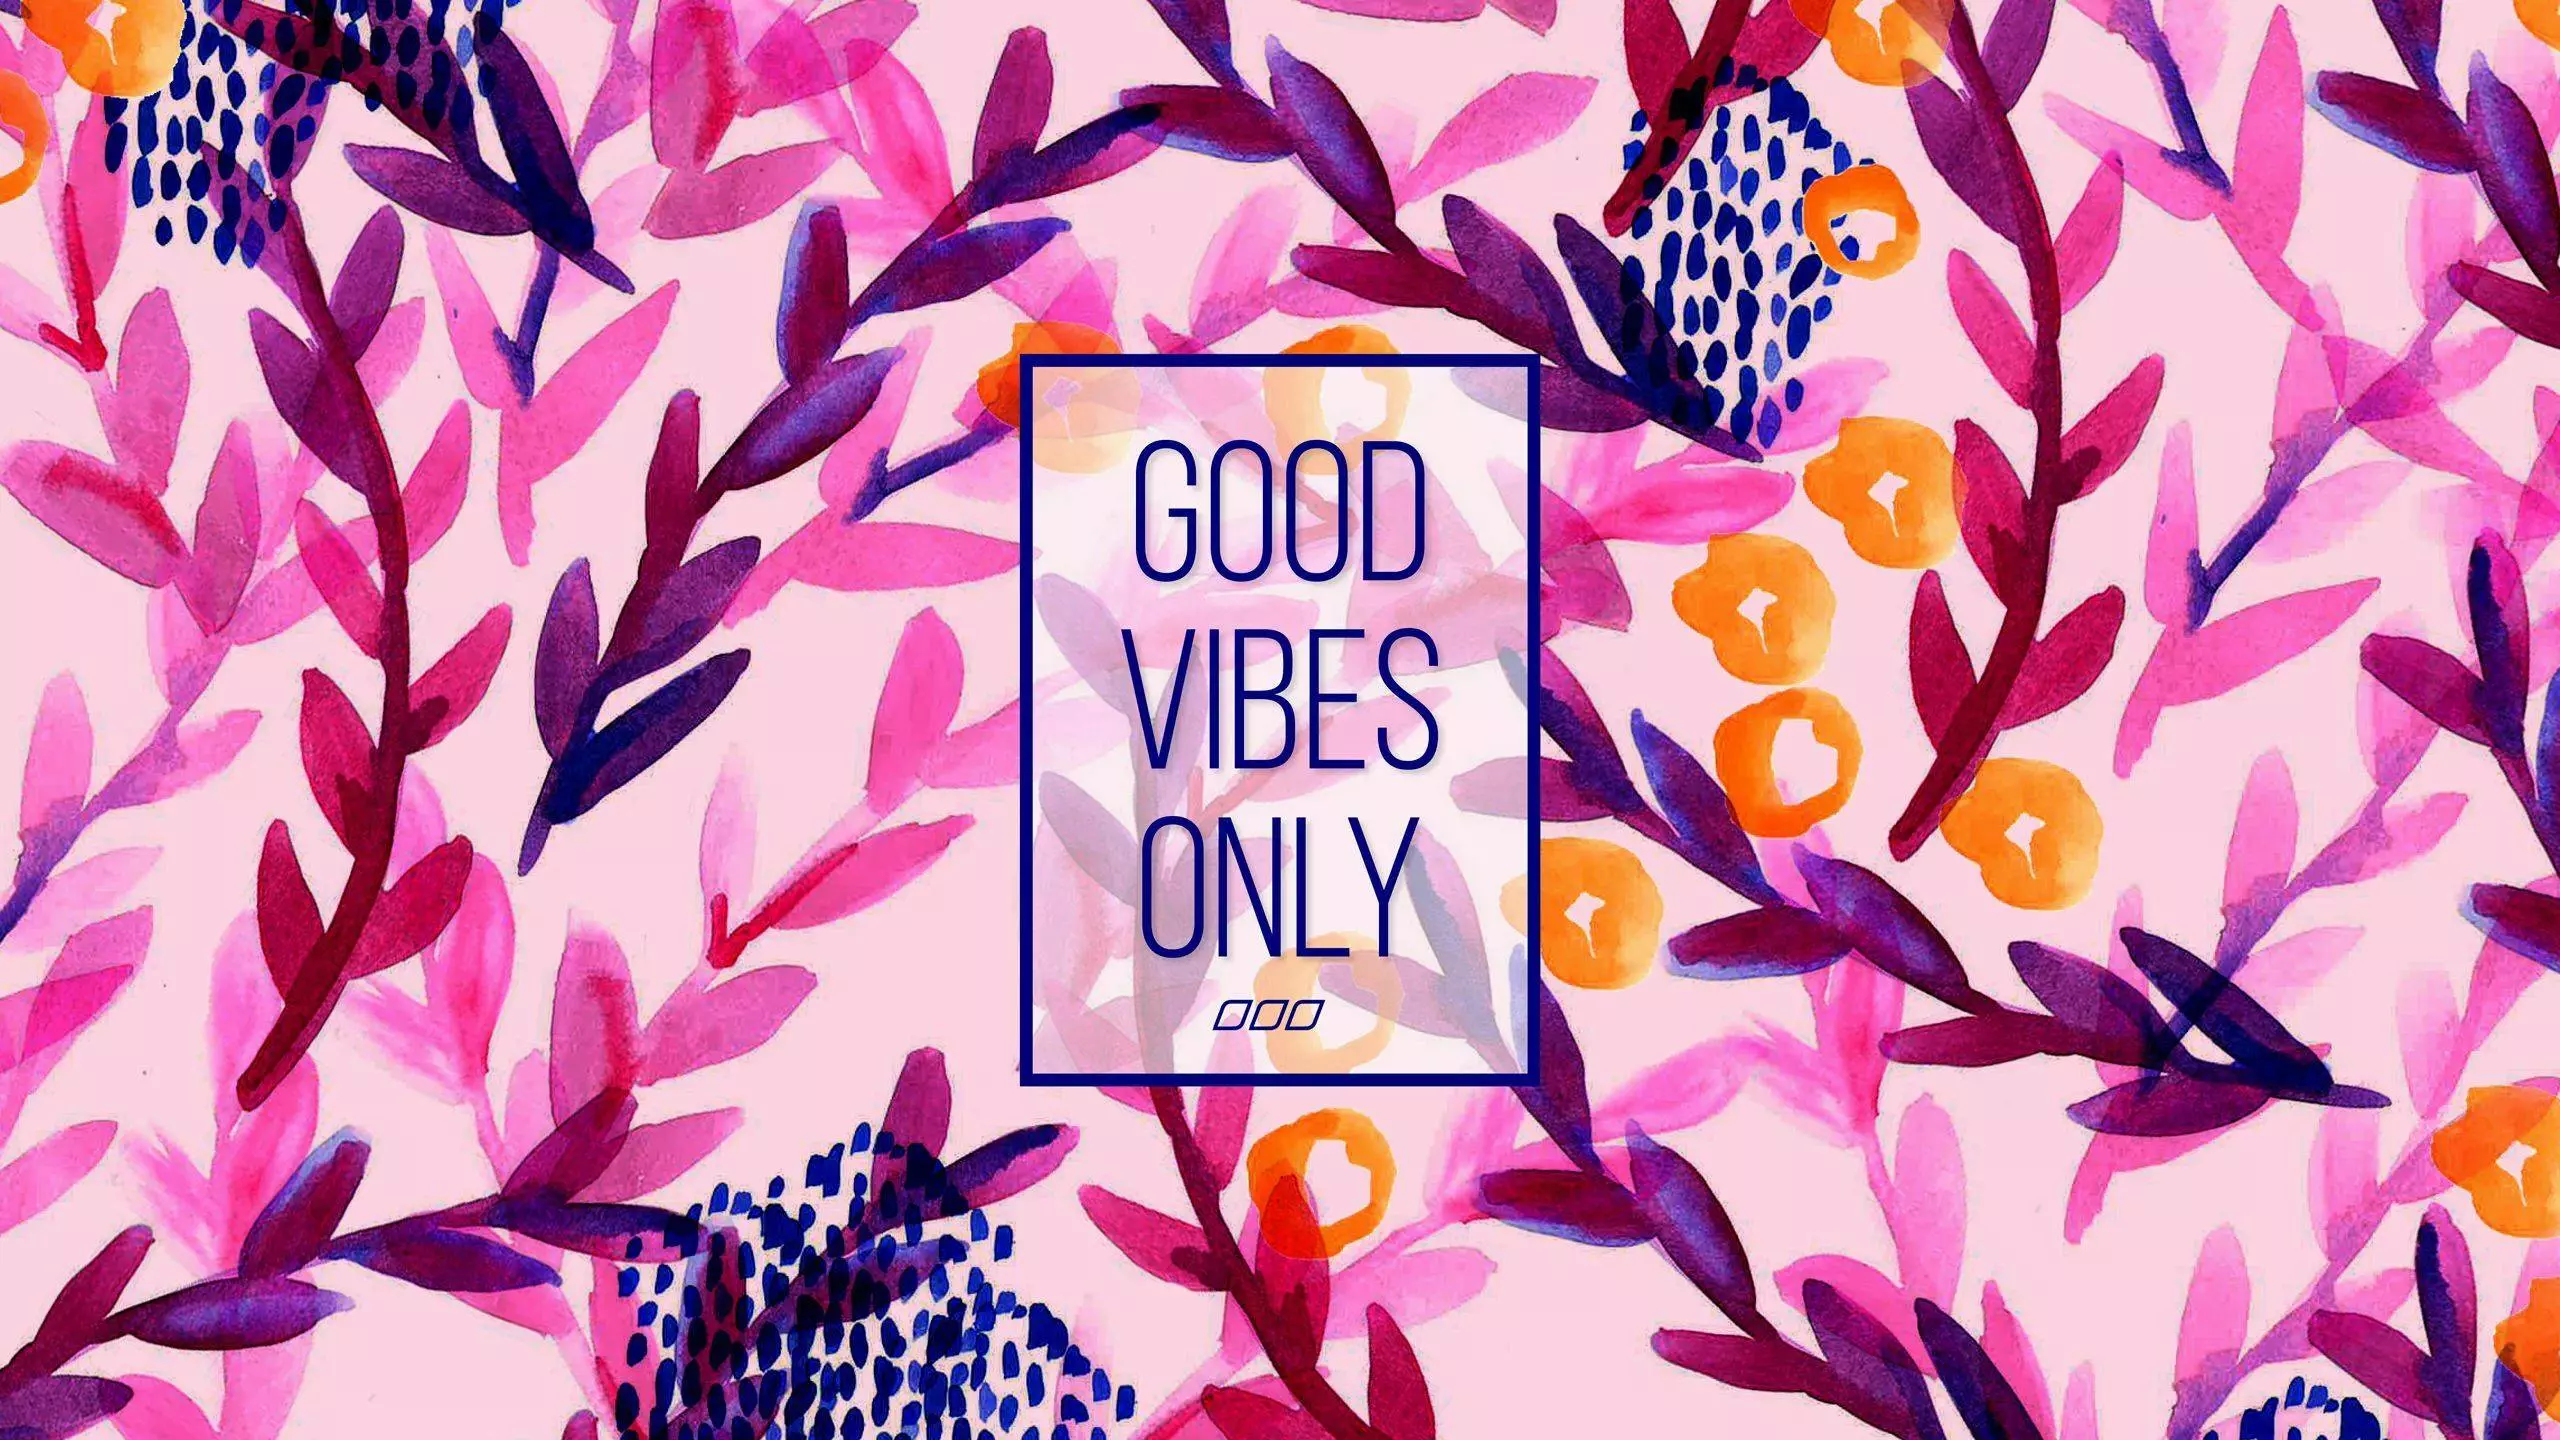 Good vibes only wallpaper - Positive